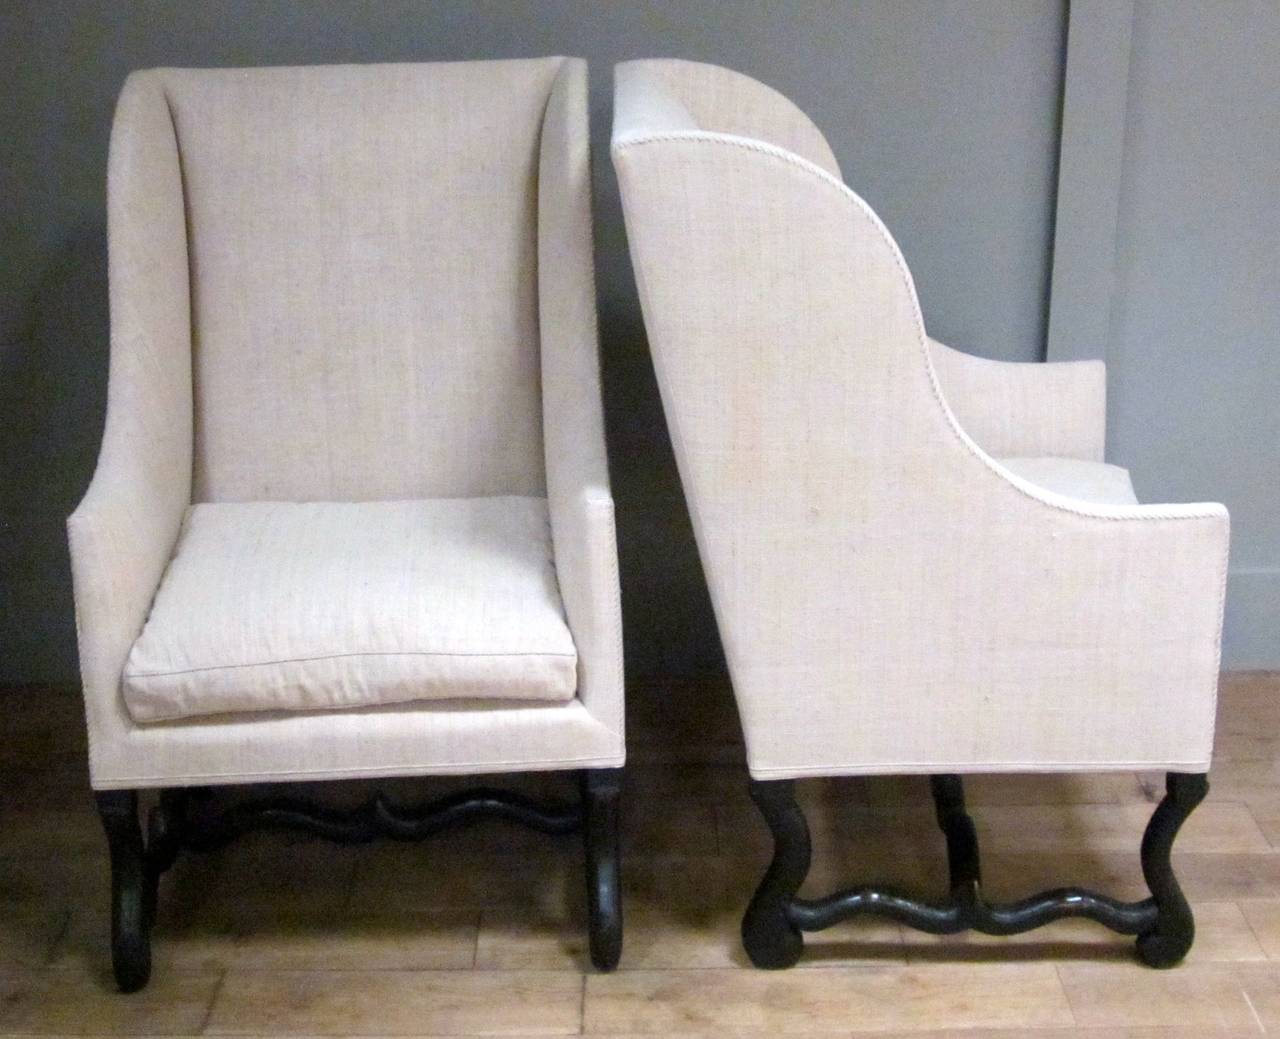 18th century French pair of recently reupholstered Os d'Mouton club chairs.
Vintage Belgian linen fabric. Ebony carved legs. Separate seat cushions.
Deep comfortable seats. High backs.